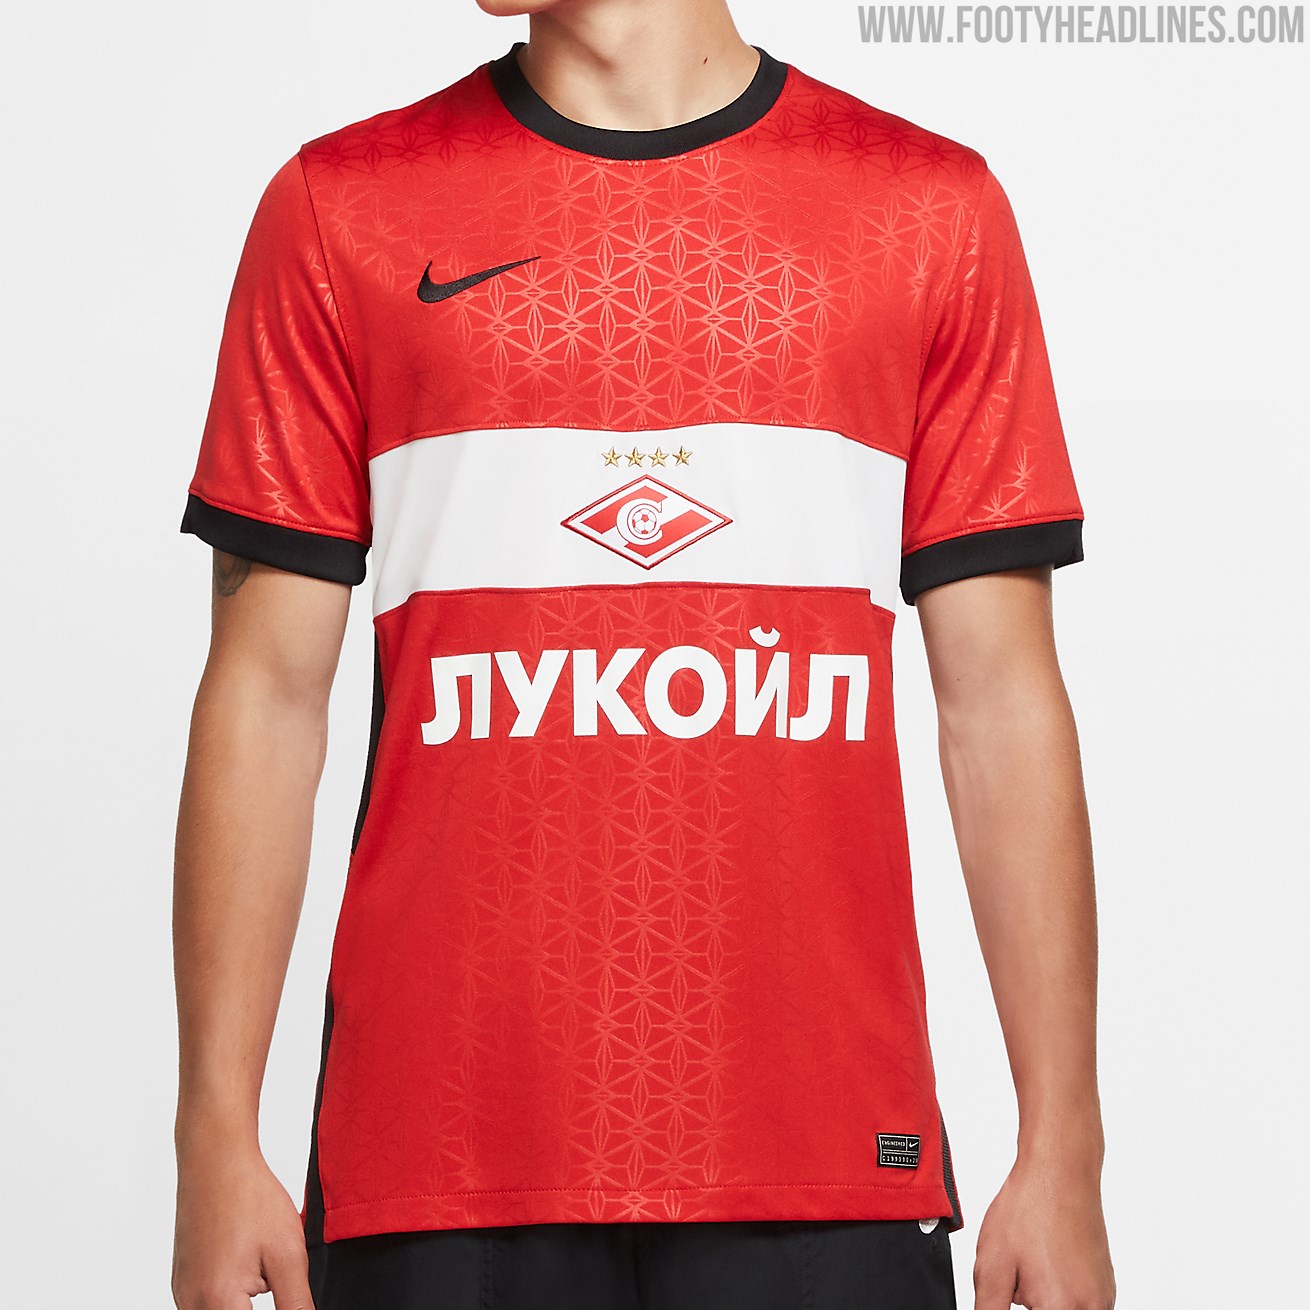 Spartak Moscow 21-22 Home & Away Kits Released - Footy Headlines